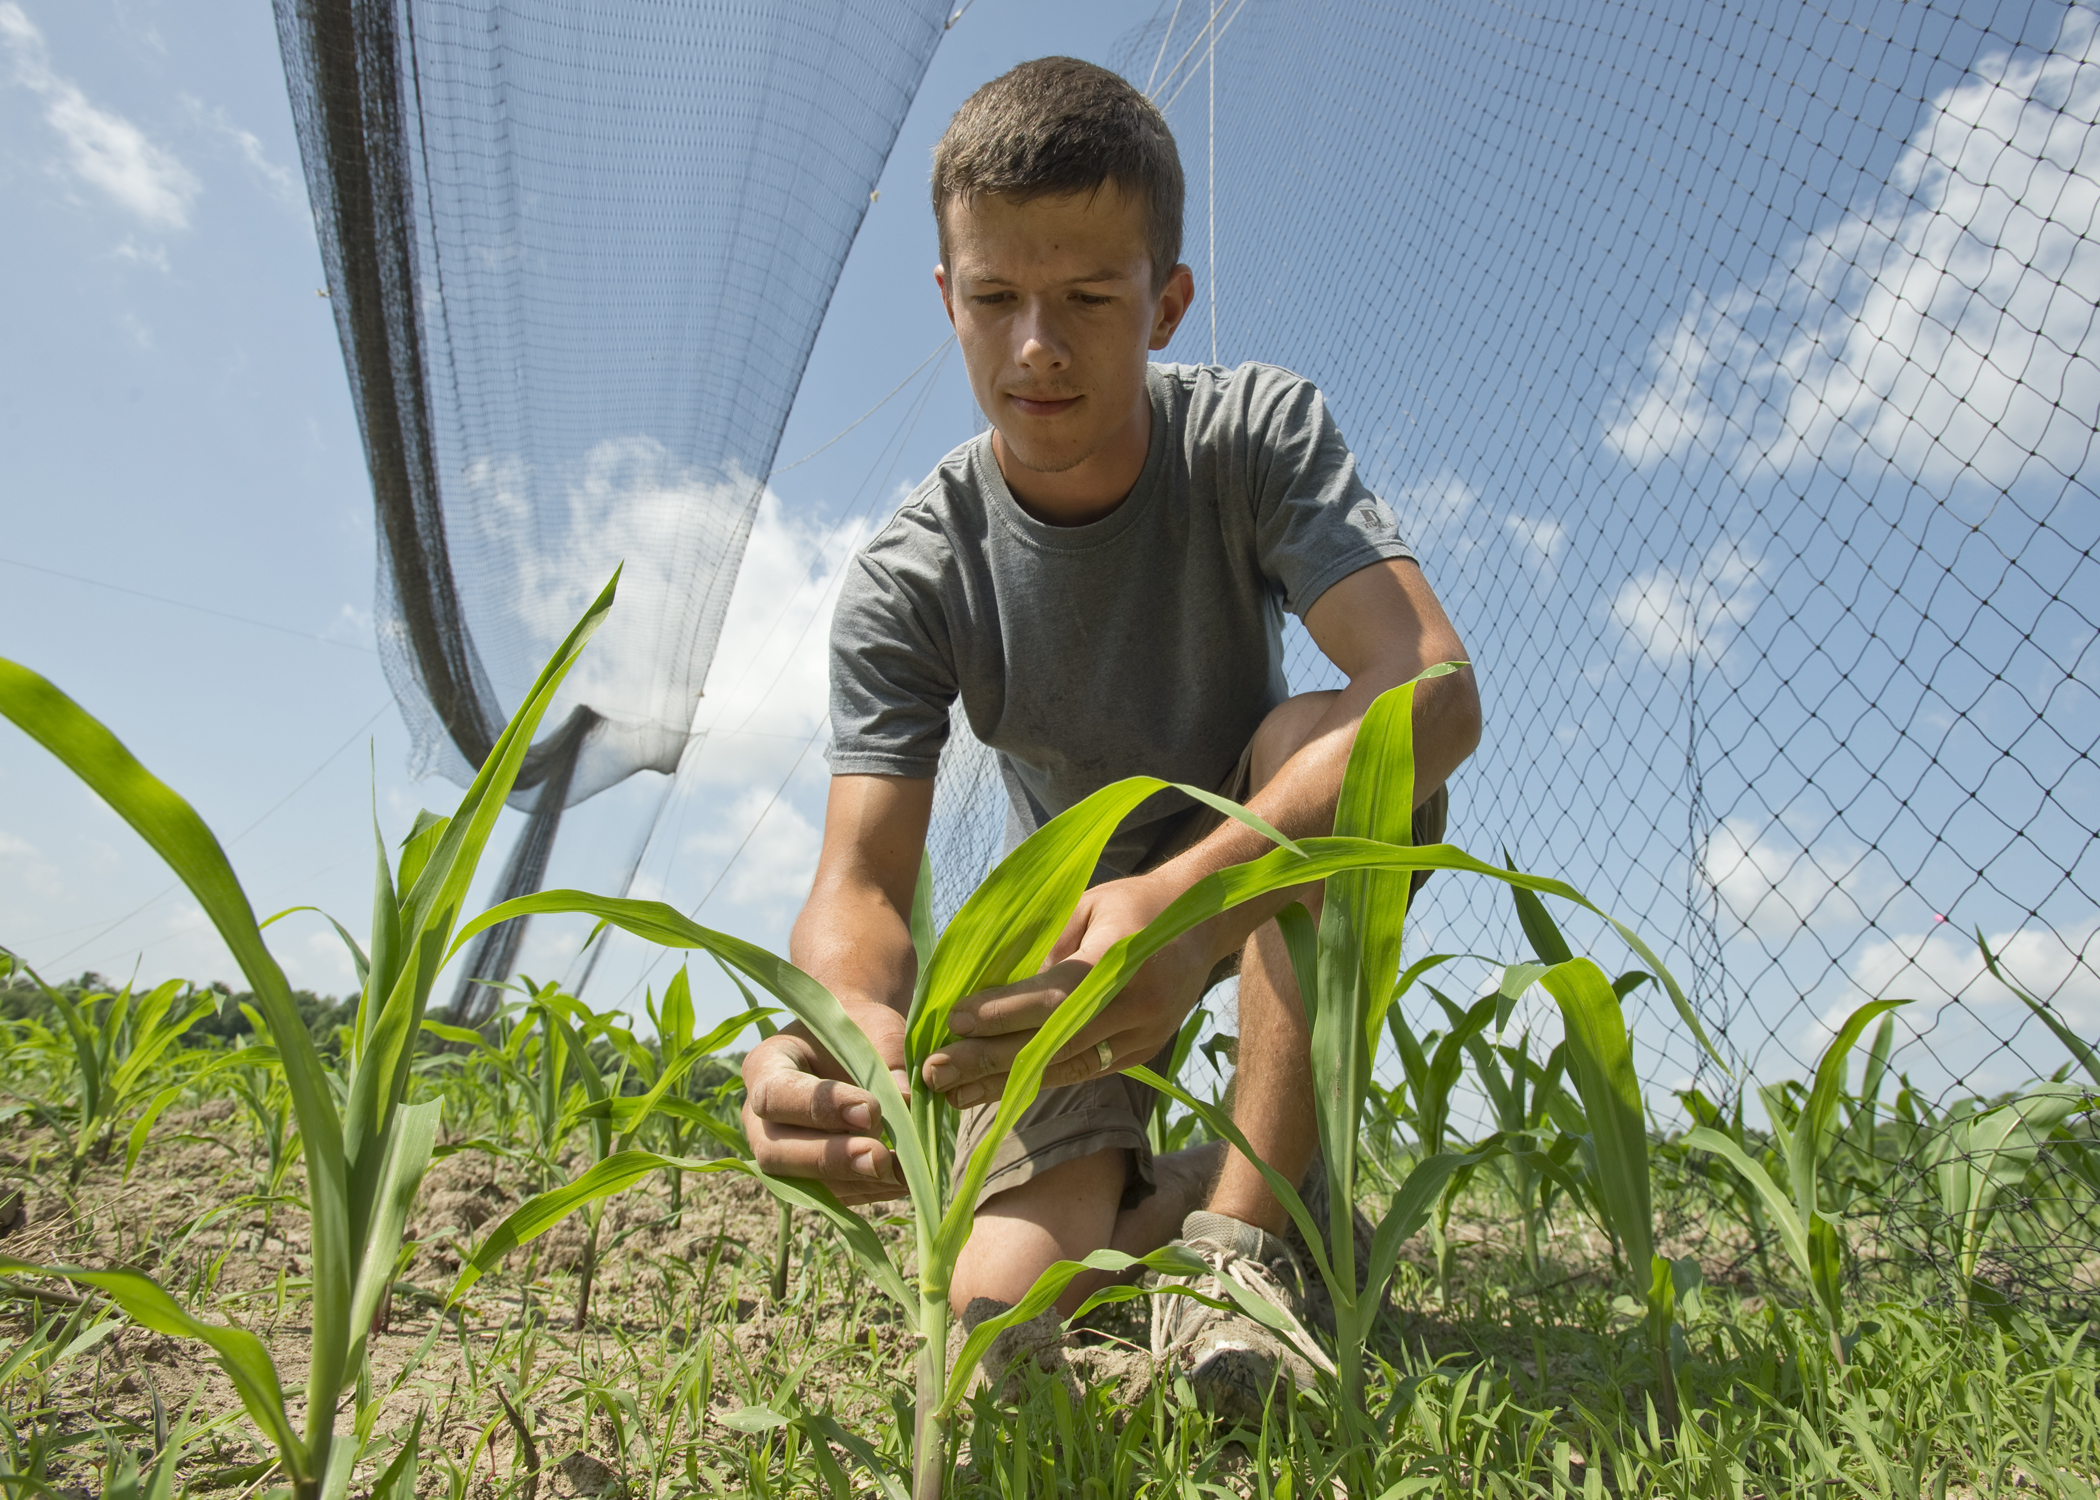 Josiah Maine, a former graduate student, examines a young corn plant.